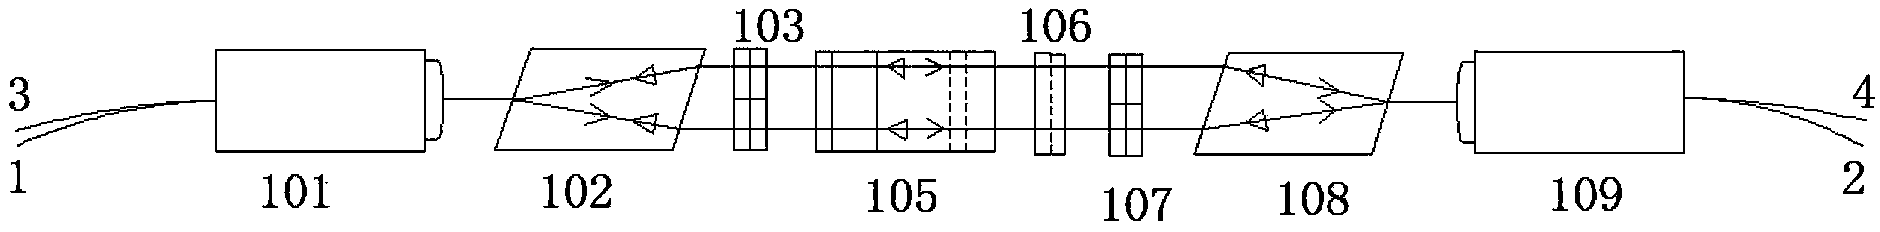 Four-port optical circulator with symmetric structure